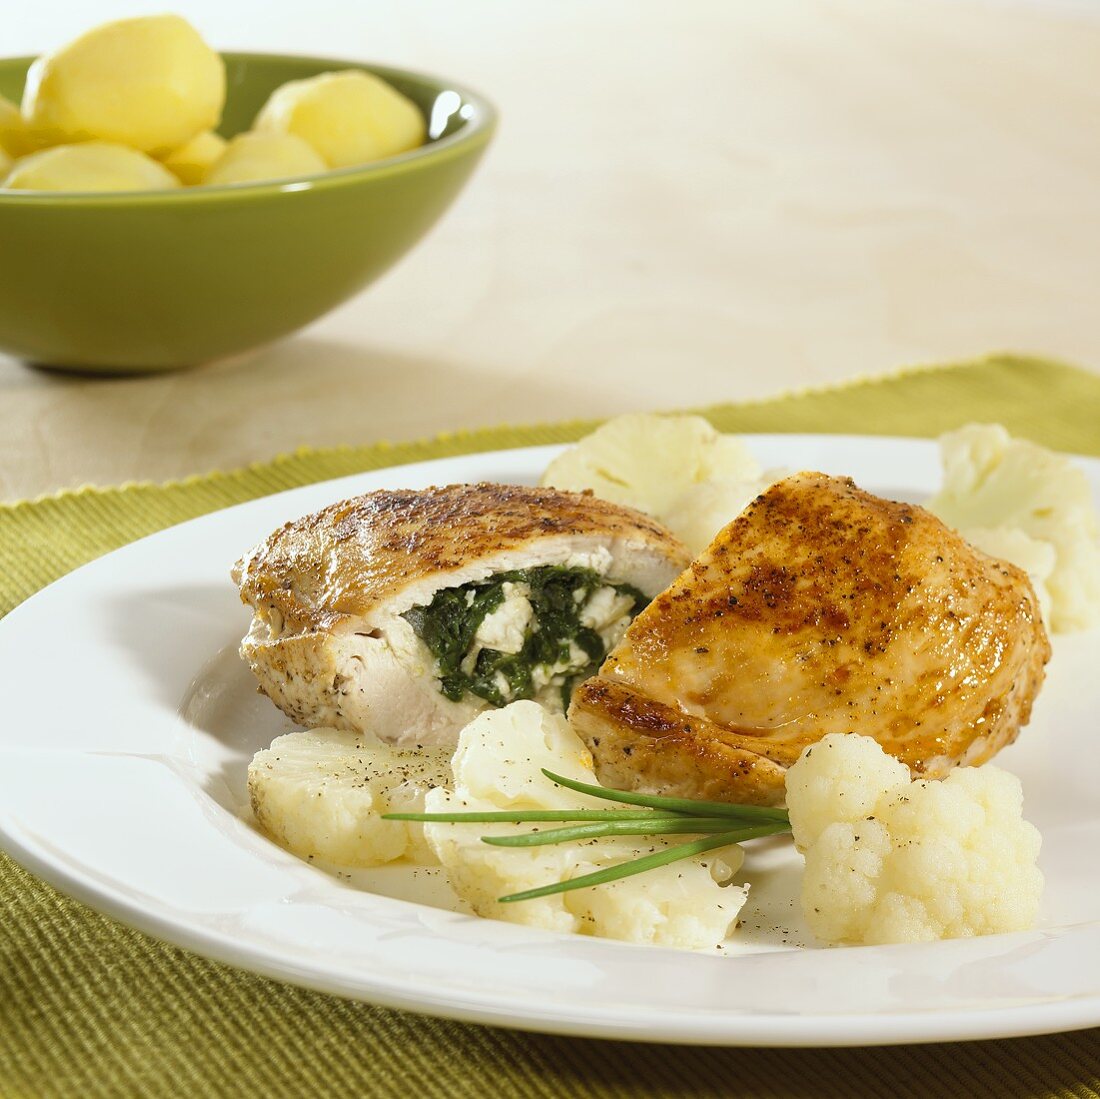 Chicken breast stuffed with spinach